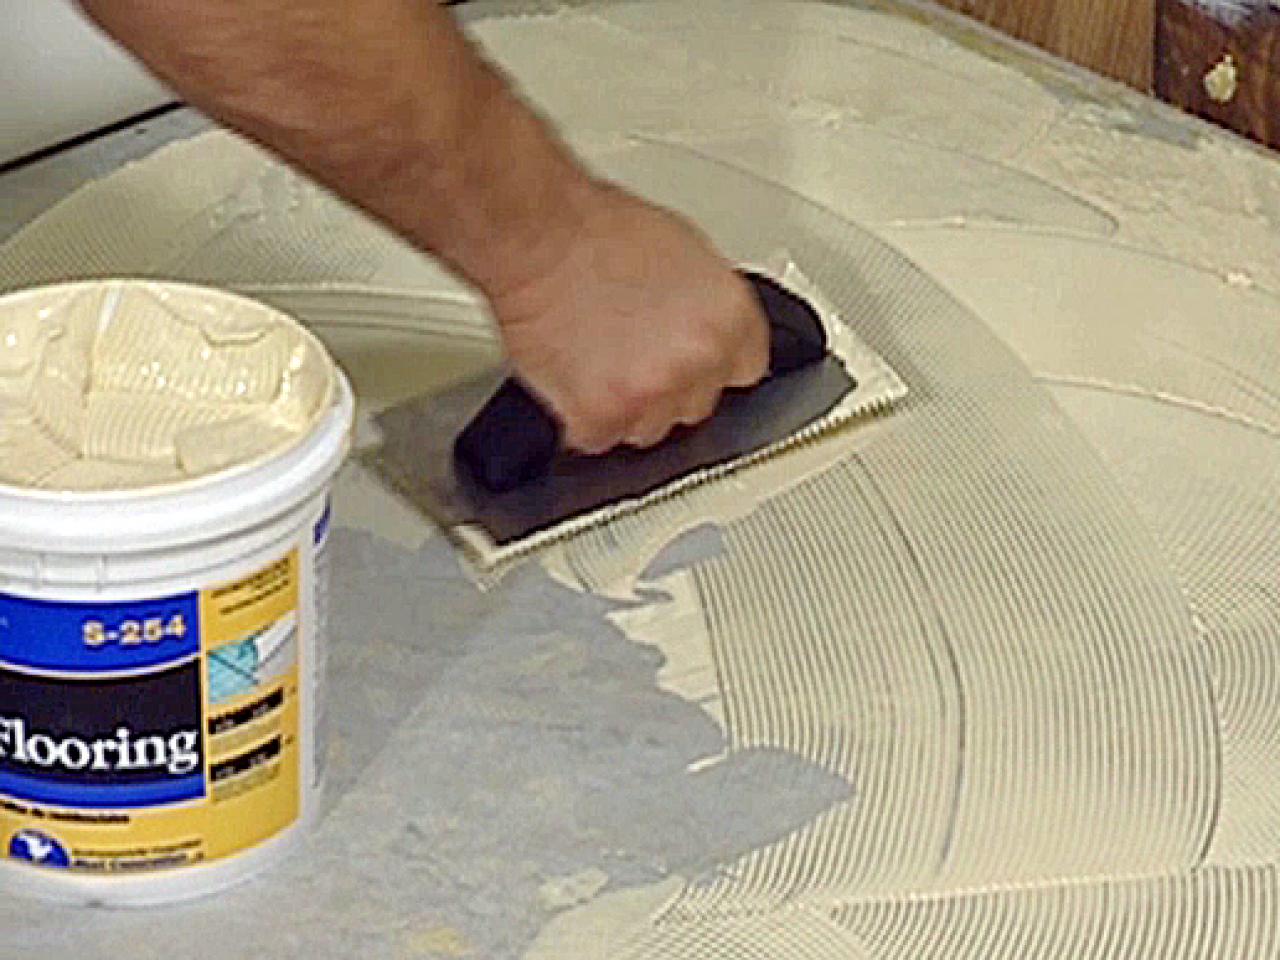 How To Remove And Add Vinyl Flooring, How To Remove Sticky Glue From Vinyl Flooring